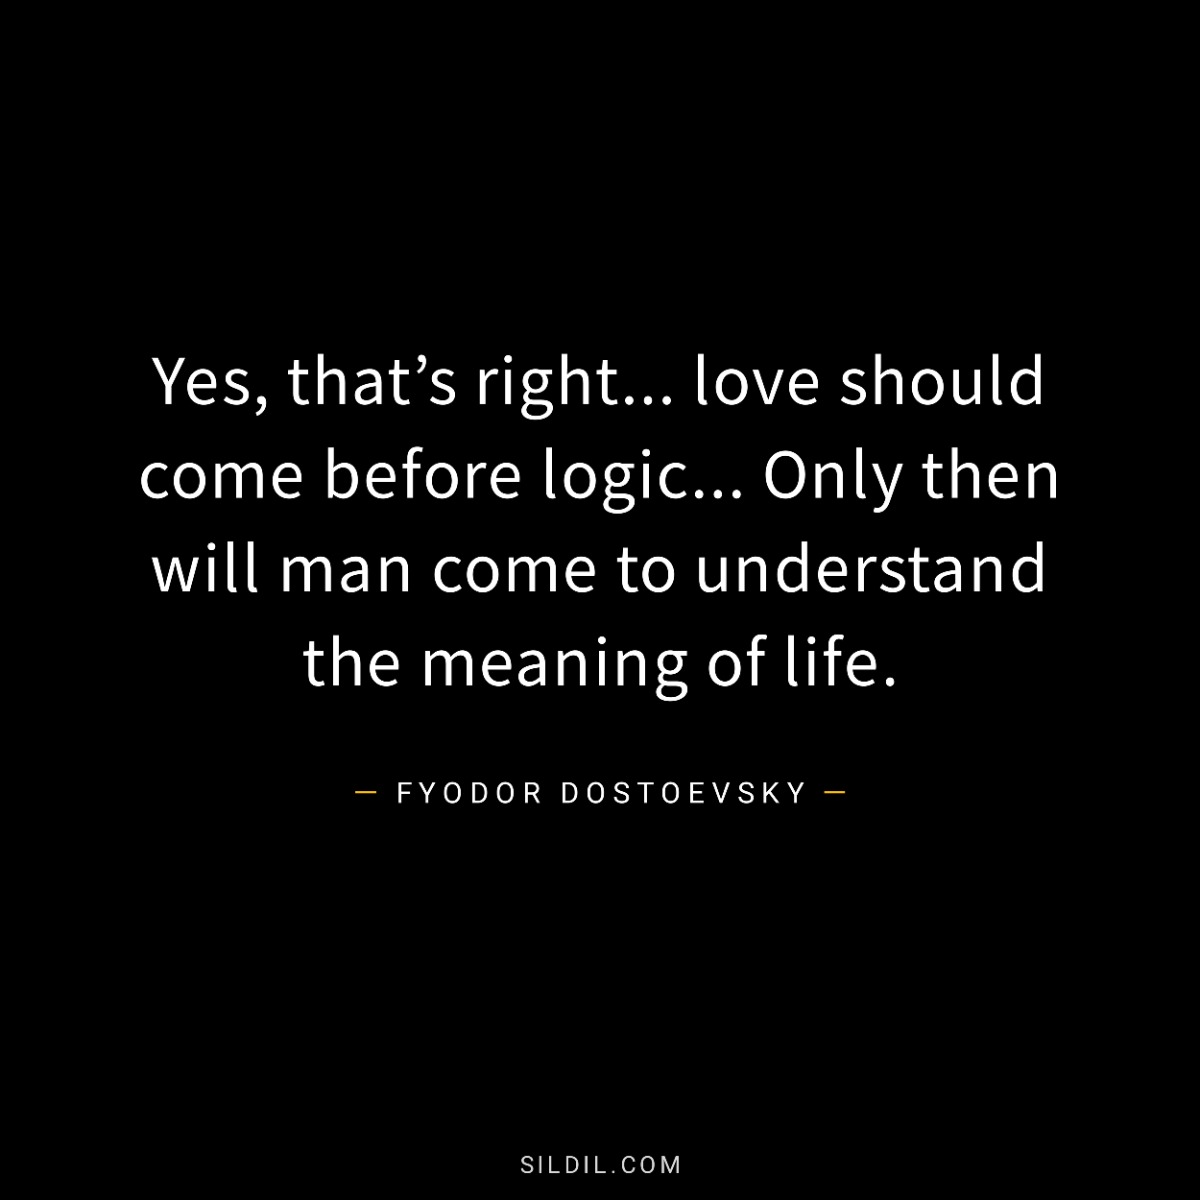 Yes, that’s right... love should come before logic... Only then will man come to understand the meaning of life.